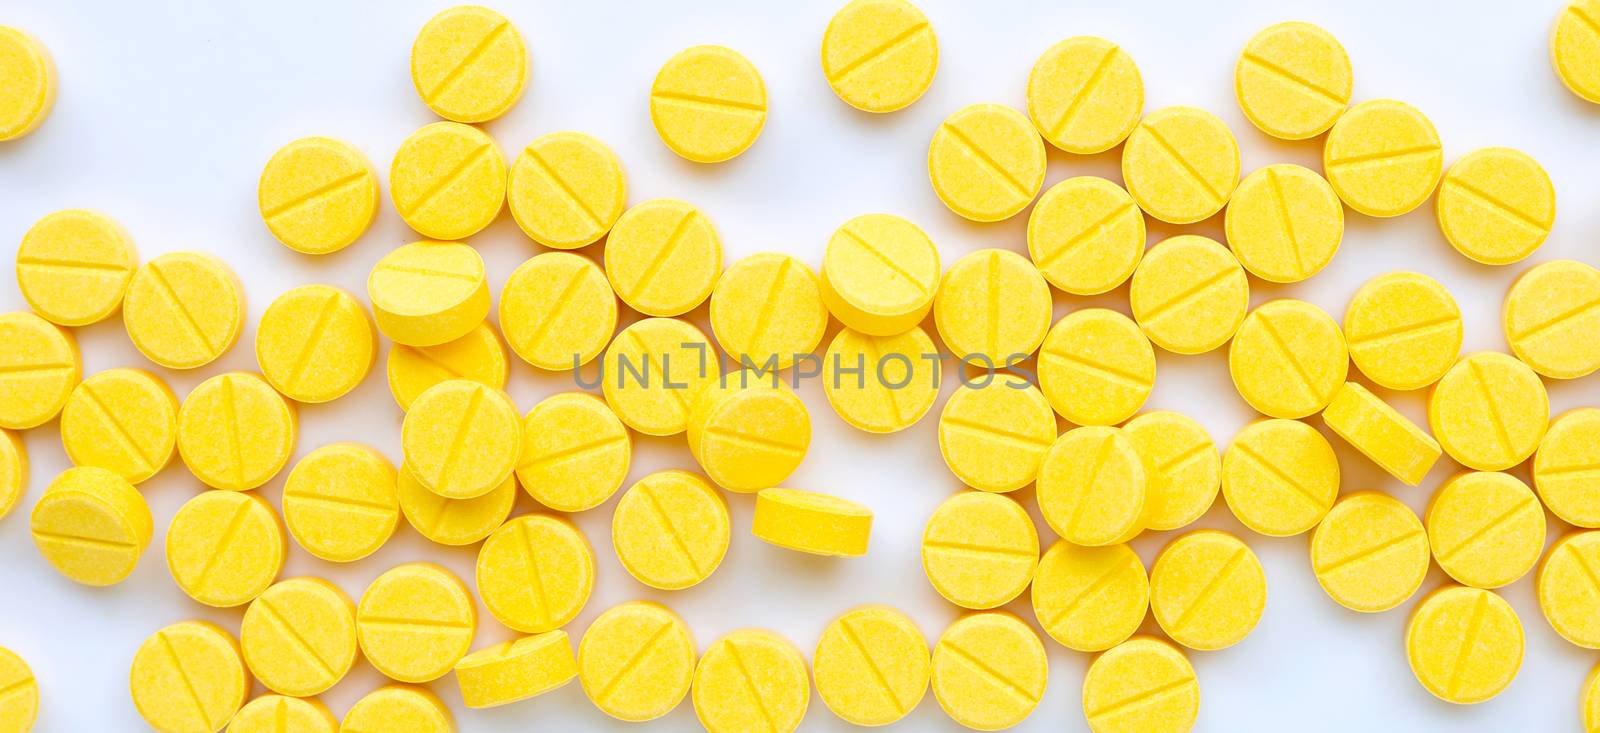 Yellow tablets of Paracetamol on white background.  by Bowonpat